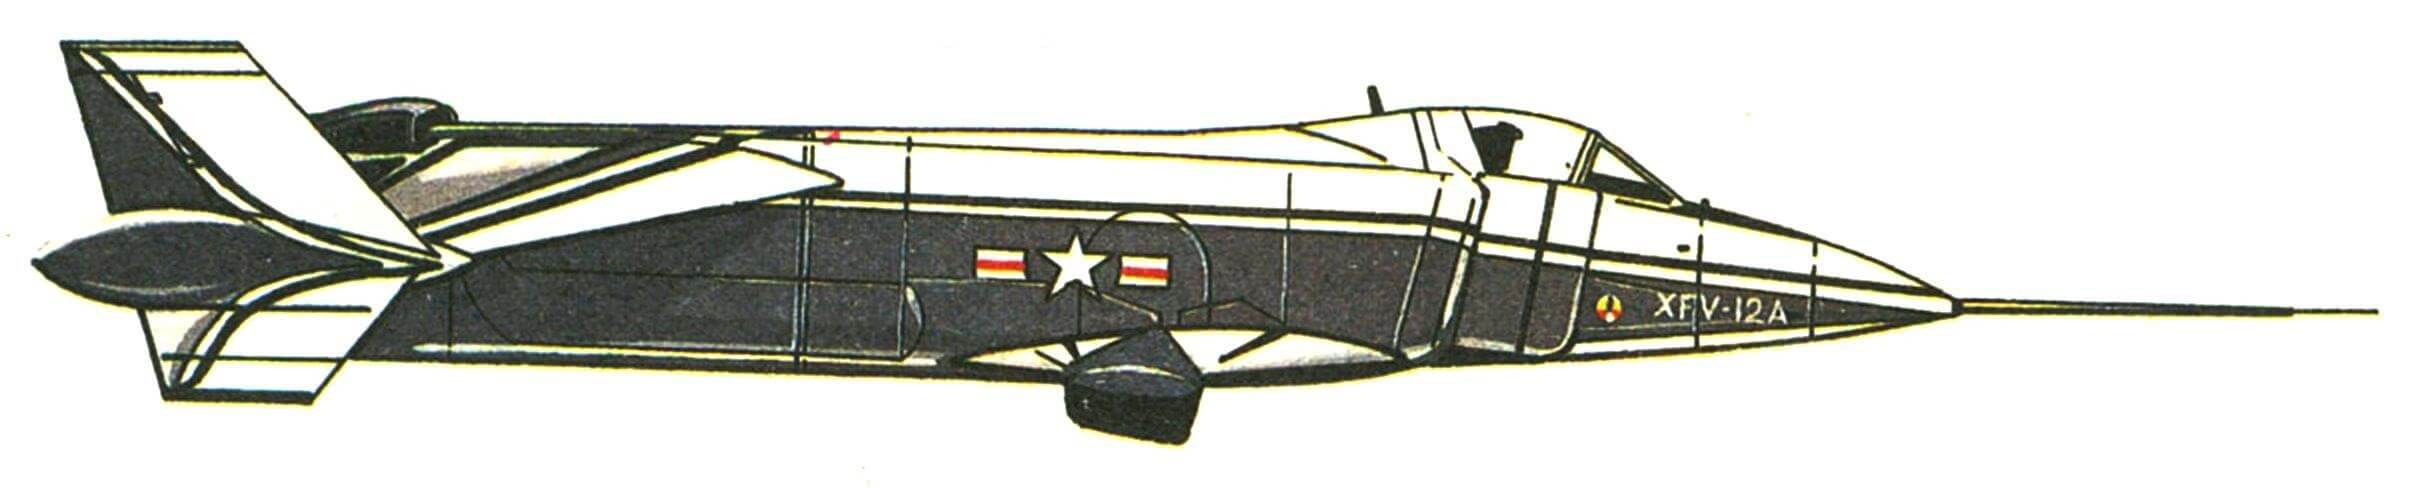 ROCKWELL XFV-12A